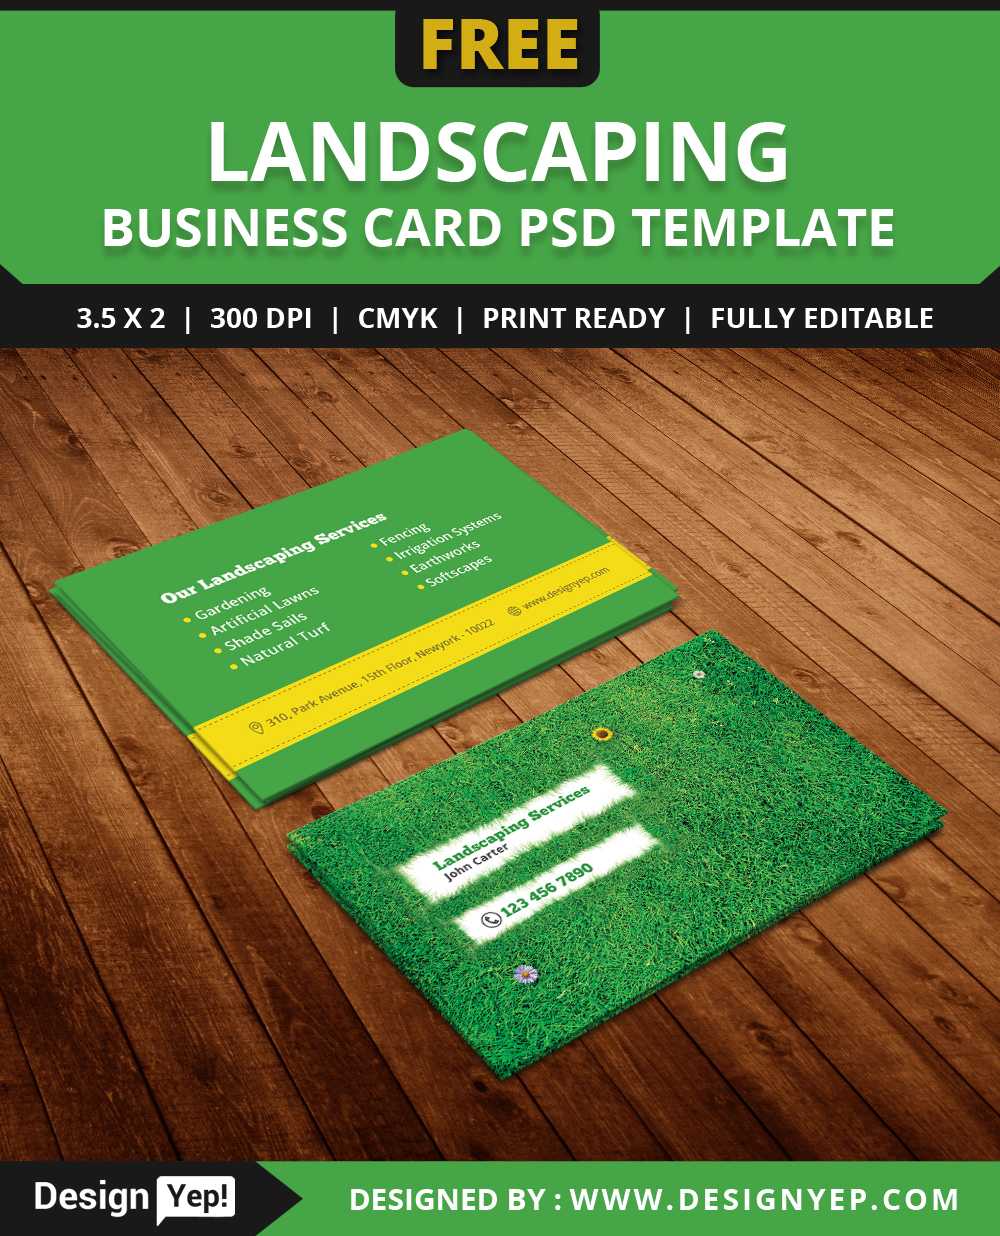 41 Landscaping Business, 25 Best Ideas About Lawn Care Intended For Lawn Care Business Cards Templates Free